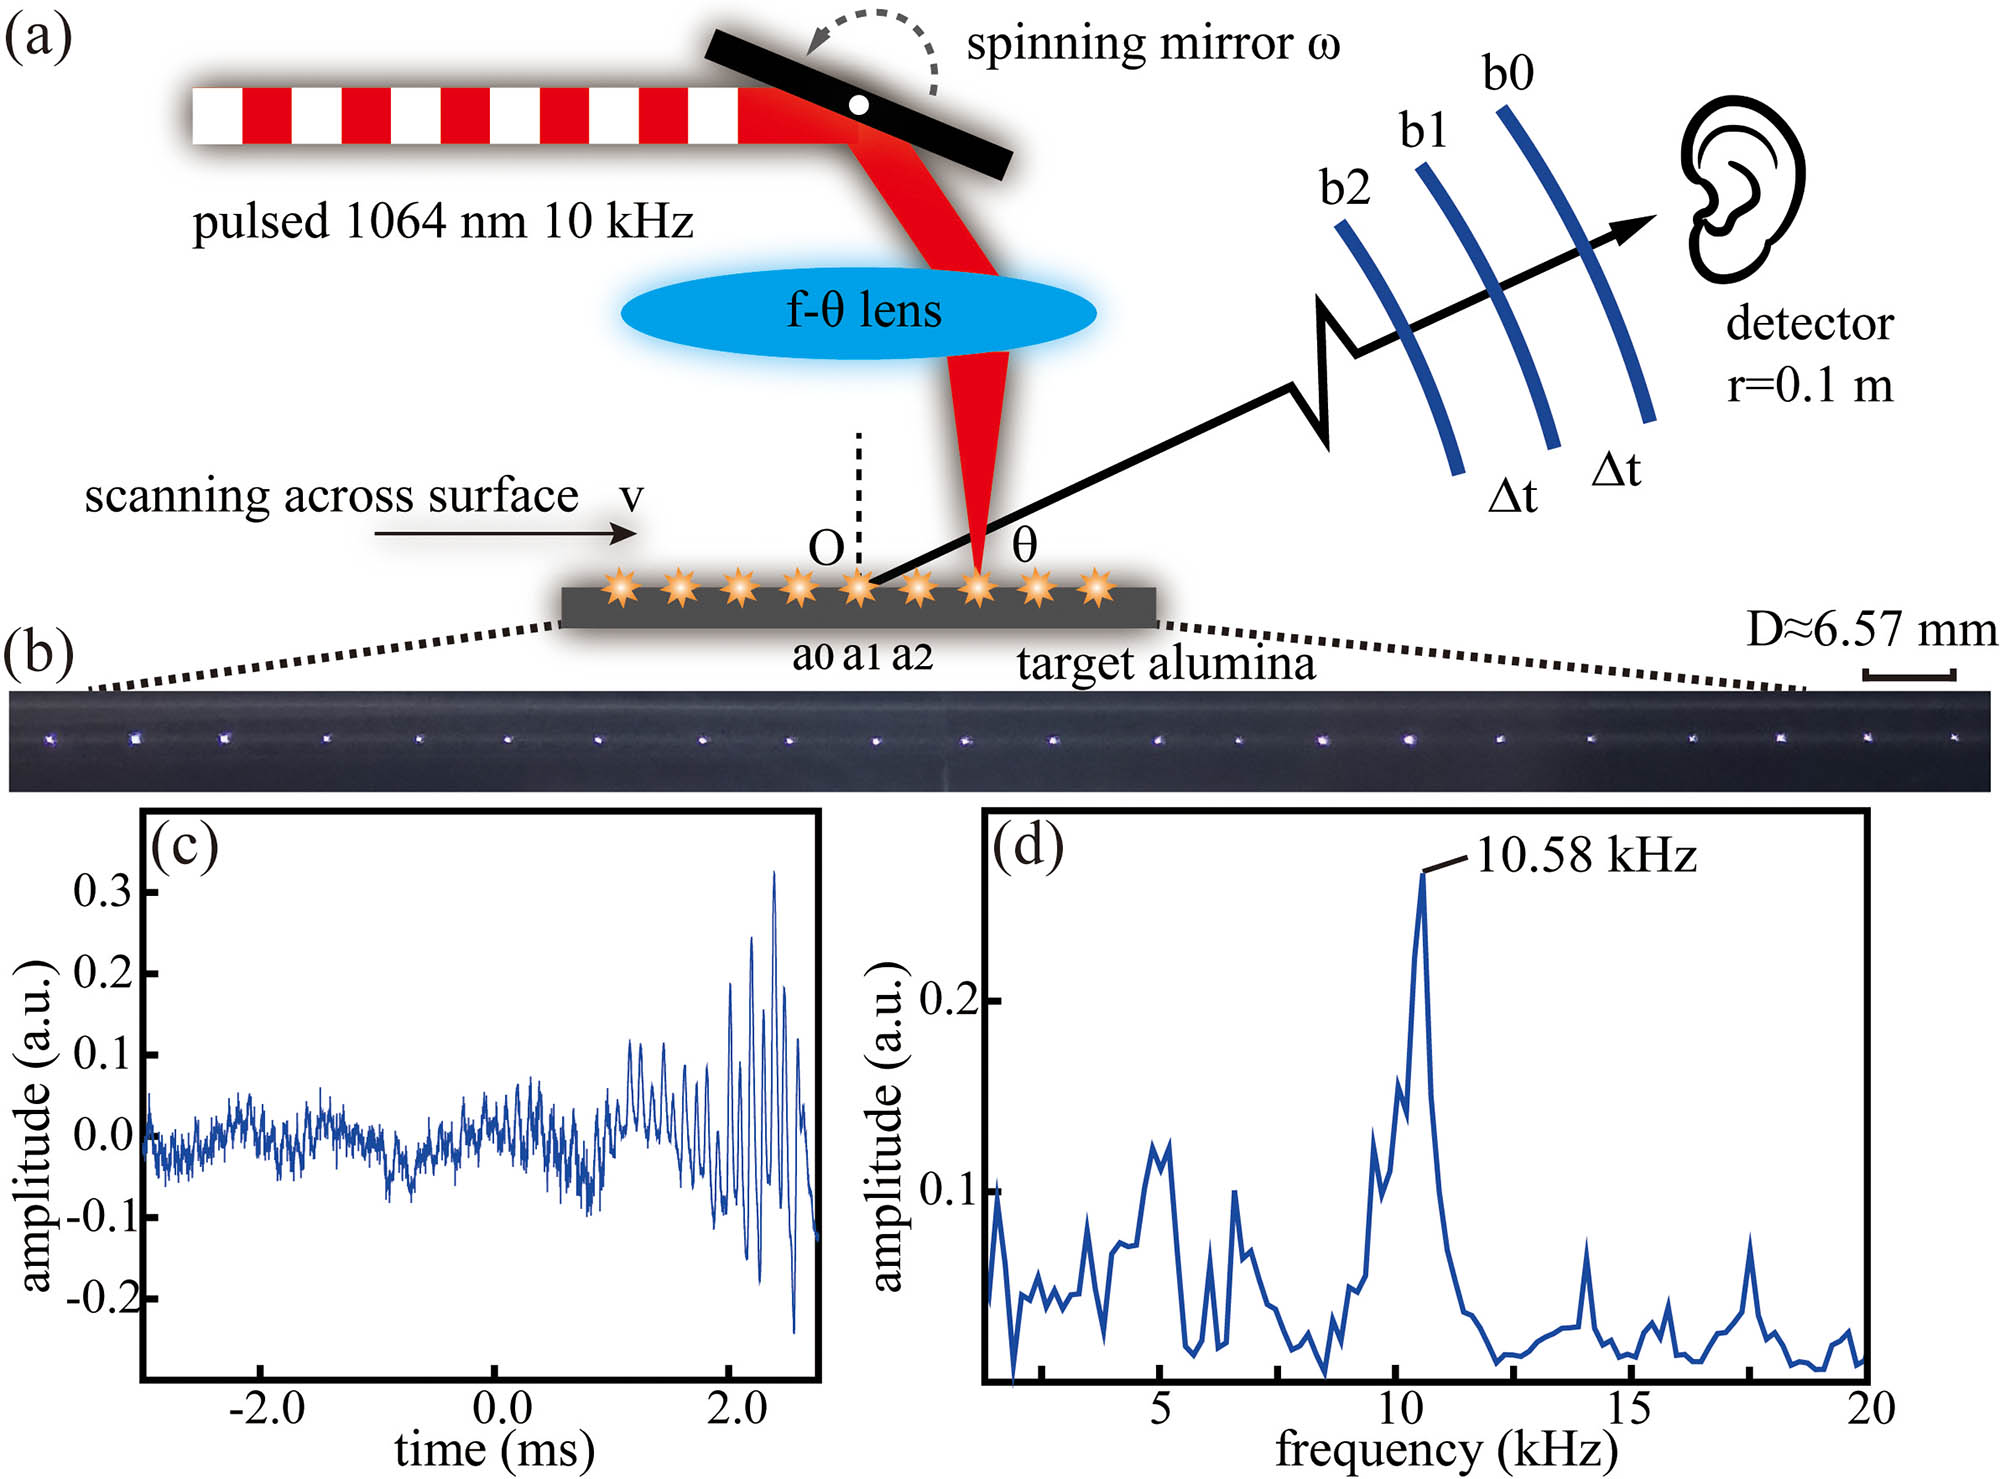 Experimental observation of SPR-like photoacoustic radiation from a linear phased array in the far field. (a) Given a rotating mirror with a stable angular speed ω, the pump is scanned and focused onto the target alumina plate sequentially in the order a0→a1→a2, forming an effective laser-induced plasma shock wave phased array. The detector is placed r = 0.1 m from the array center O. The detector acquires the SPR signals also in the order b0→b1→b2. For a fixed detection angle θ and rotating ω, the time delay Δt remains unchanged and irrelevant to the detector’s distance in the far field. (b) Snapshot of such an SPR-like linear phased array by laser-induced plasma; the periodicity D is about 6.57 mm. (c) Measured real-time temporal signal and (d) its corresponding spectrum with a peak frequency at 10.58 kHz. The signal is collected and processed at a surface scanning speed of 10 m/s (effective periodicity ∼1 mm) at θ = 0°.